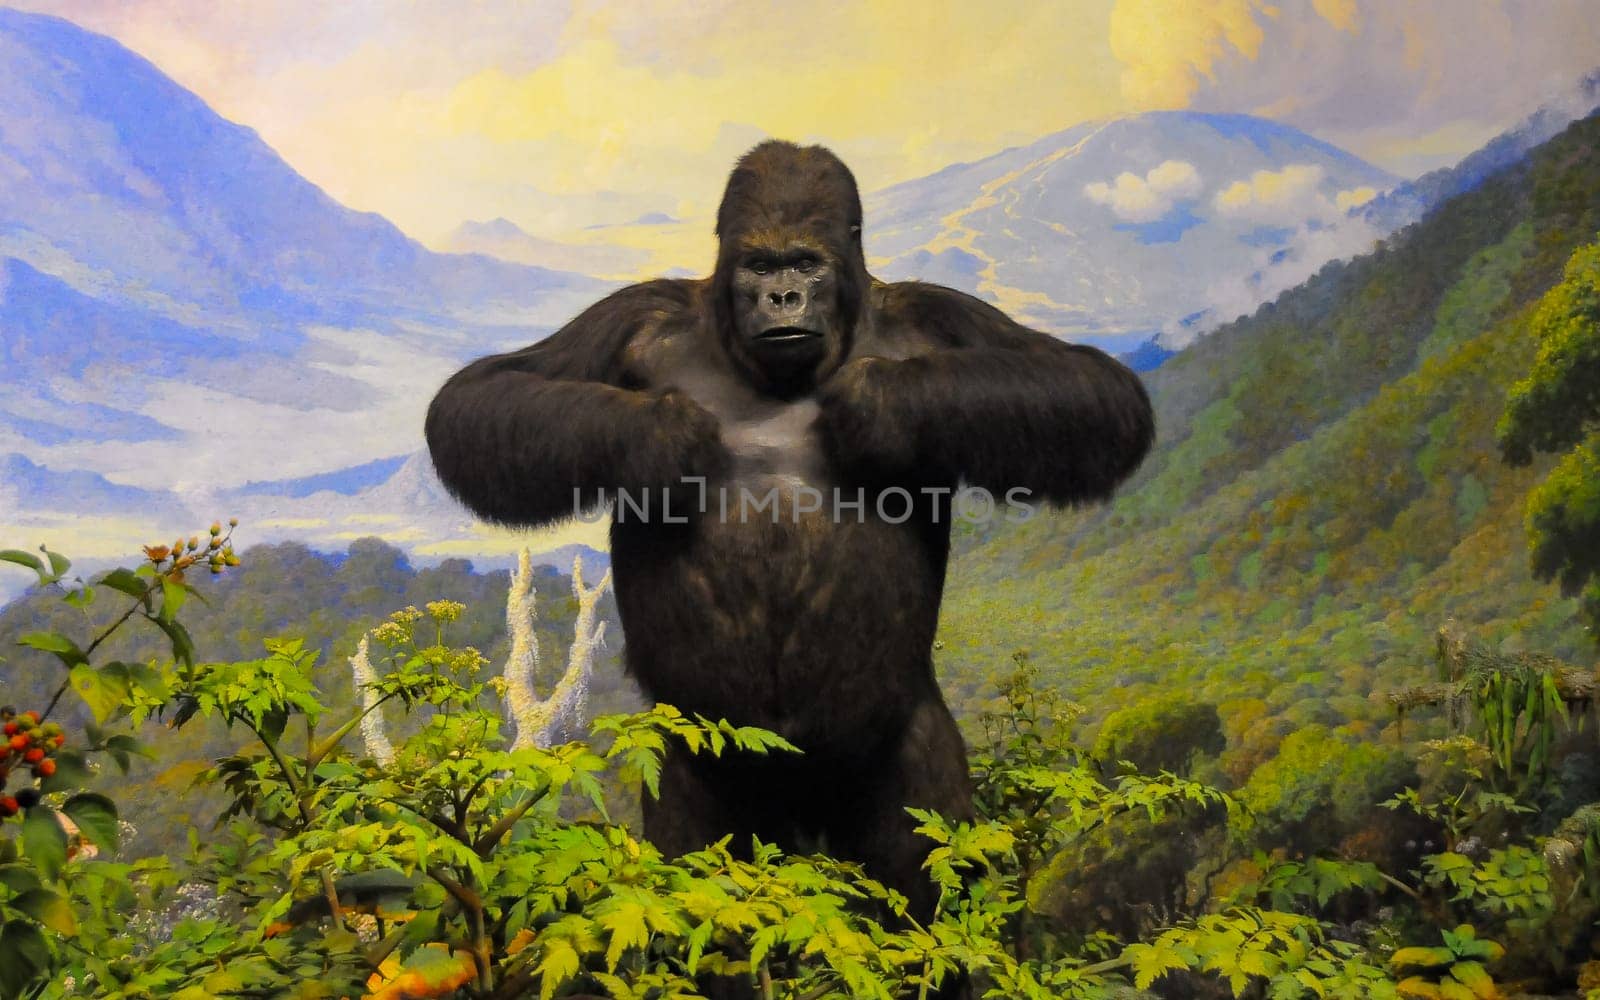 NEW YORK, USA - DECEMBER 05, 2011: A stuffed mountain gorilla on display at the Museum of National History, USA by Hydrobiolog